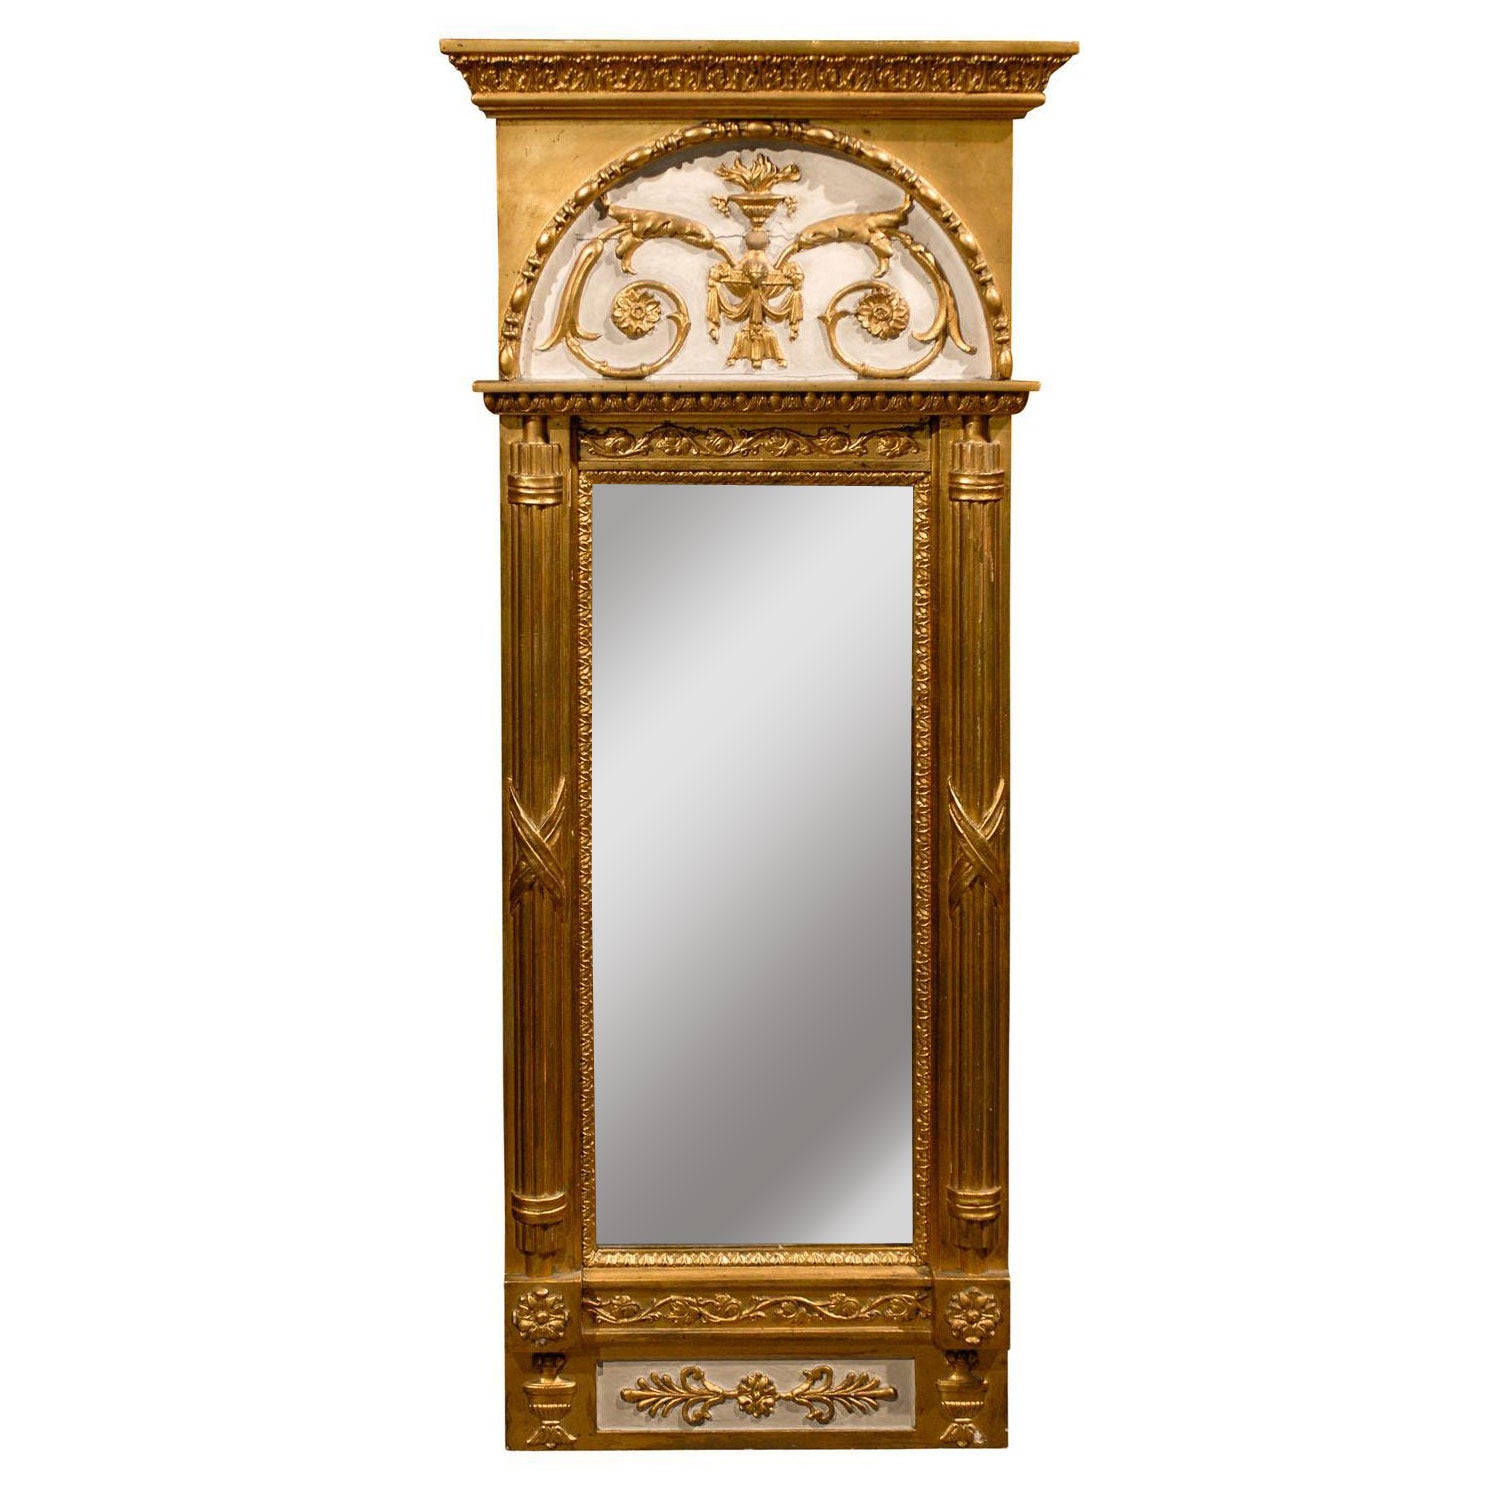 French Louis XVI Style Early 19th Century Narrow Giltwood Trumeau Mirror For Sale